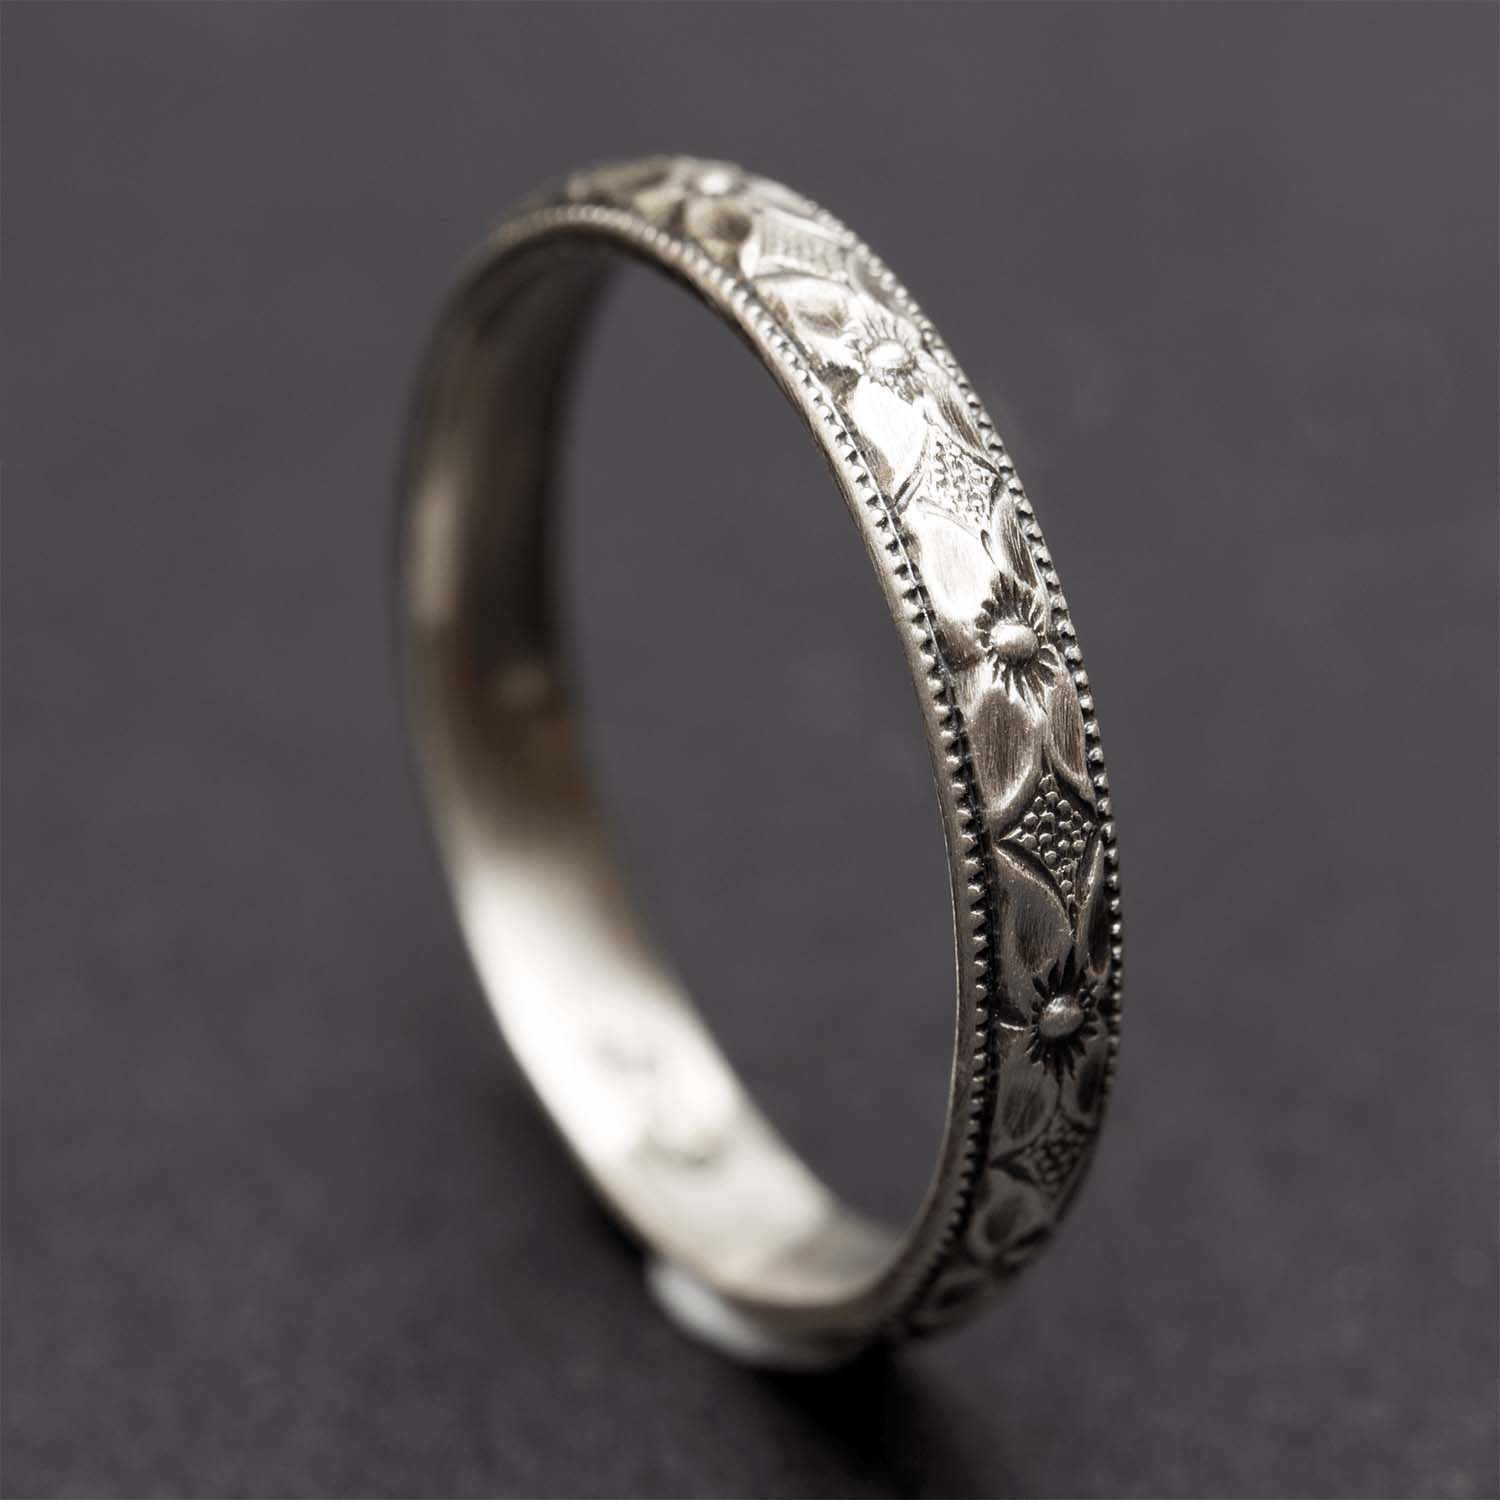 A sterling silver floral ring standing up on a dark grey background